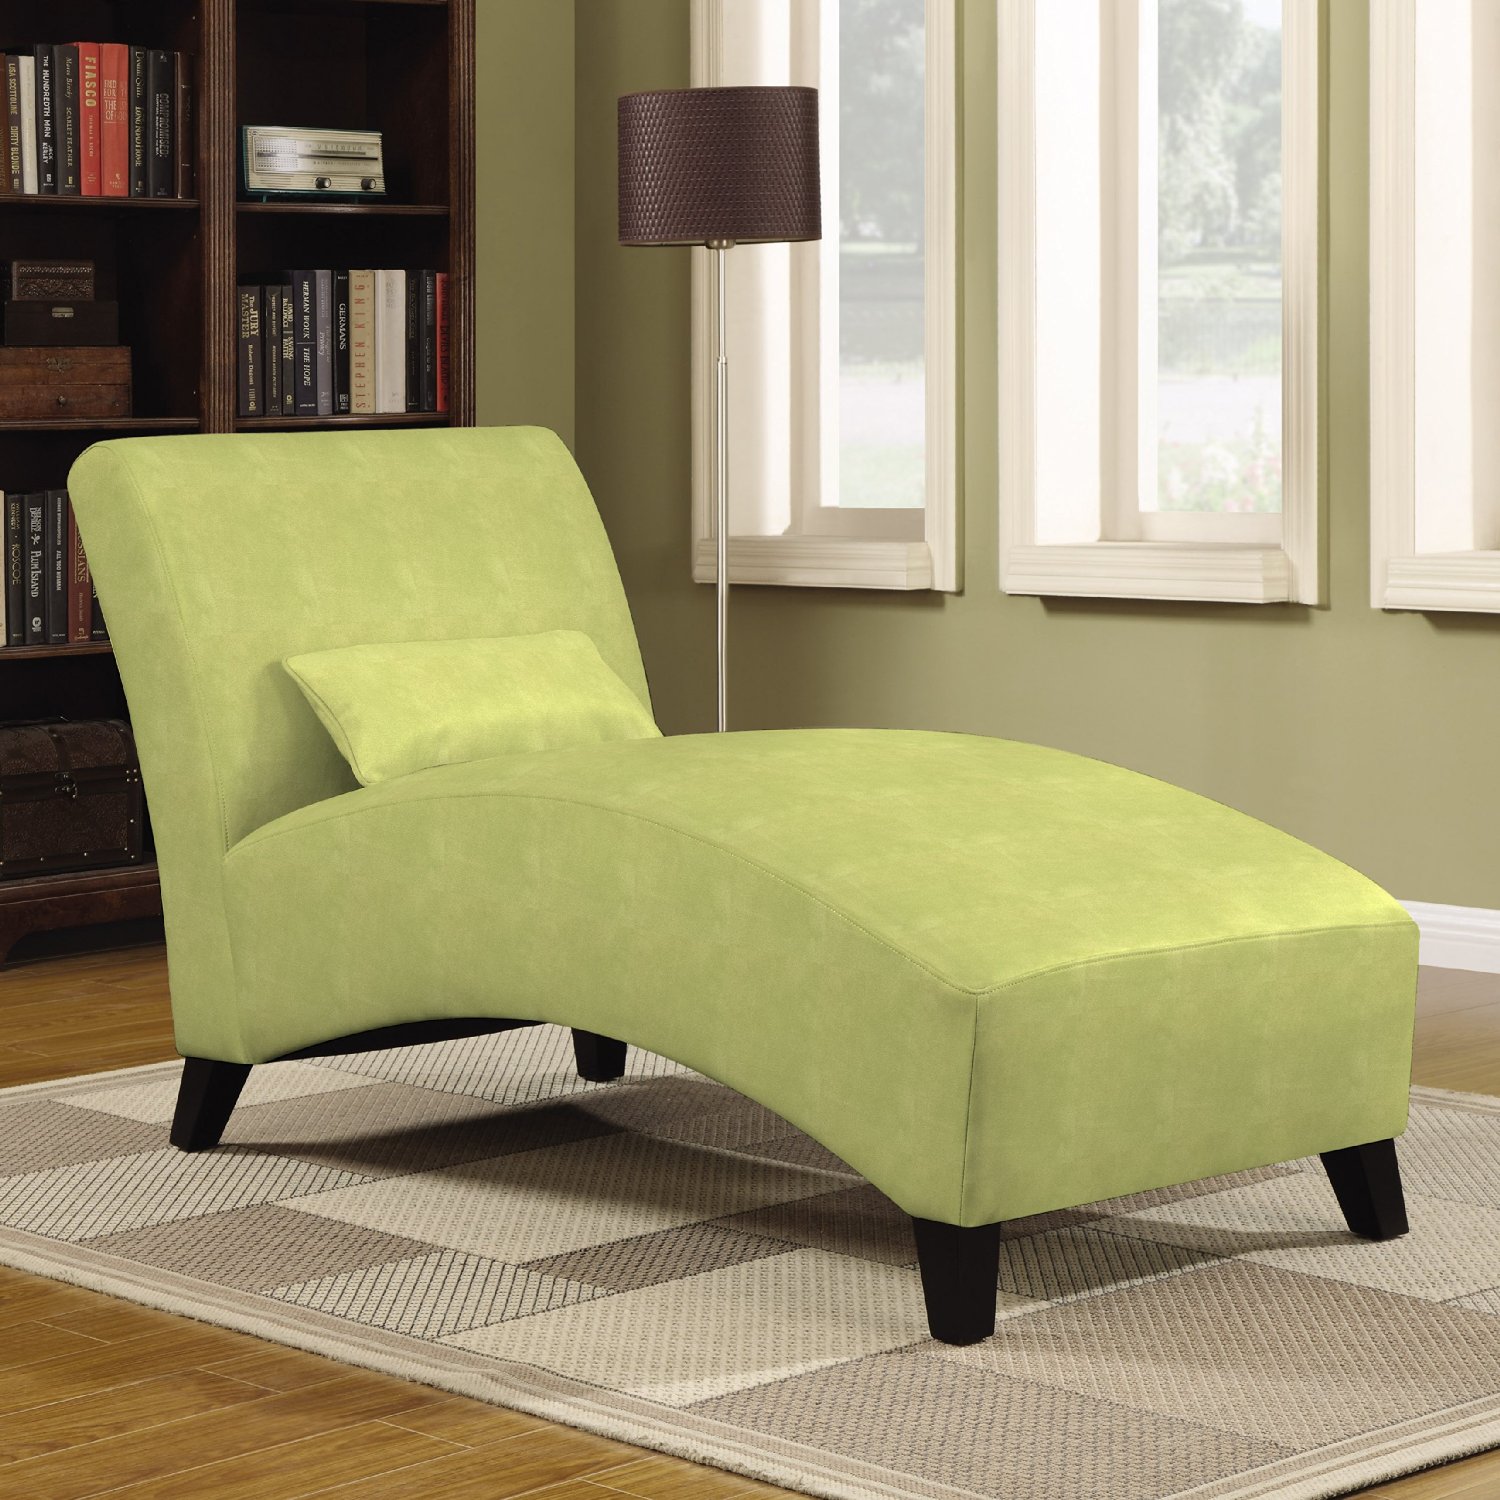 Upholstered Chaise Lounges for Bedrooms